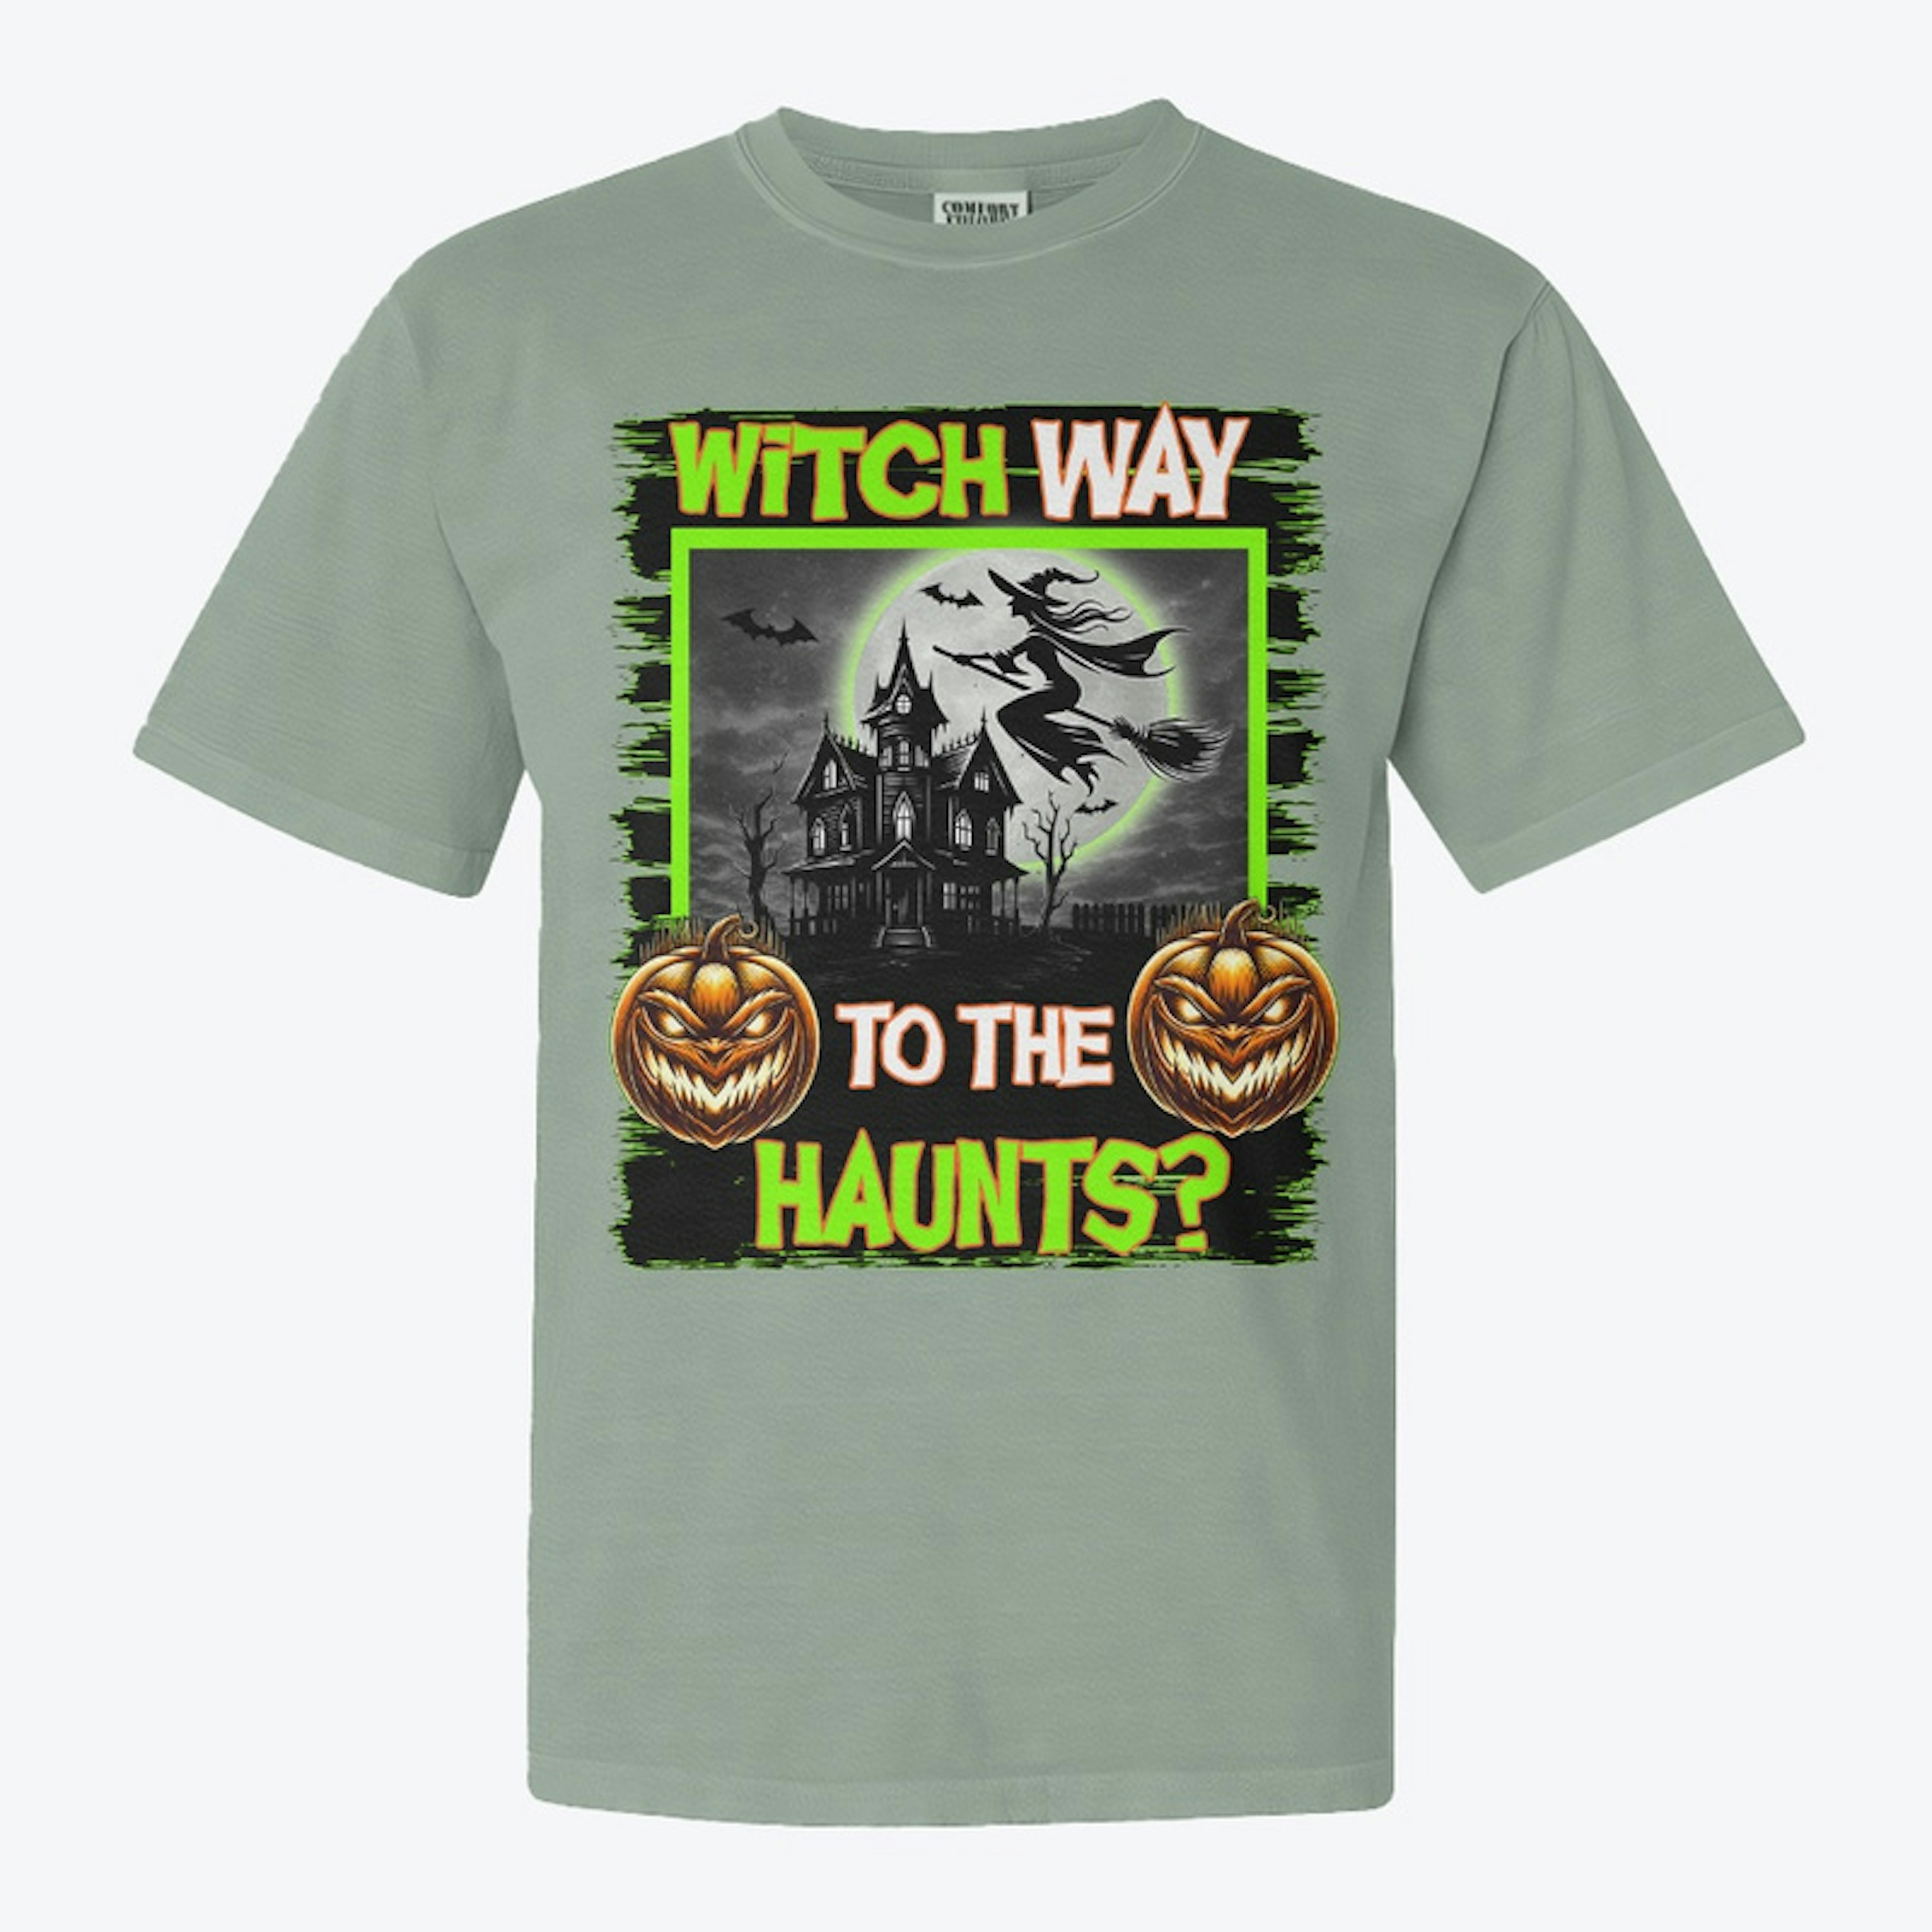 Witch Way To The Haunts?